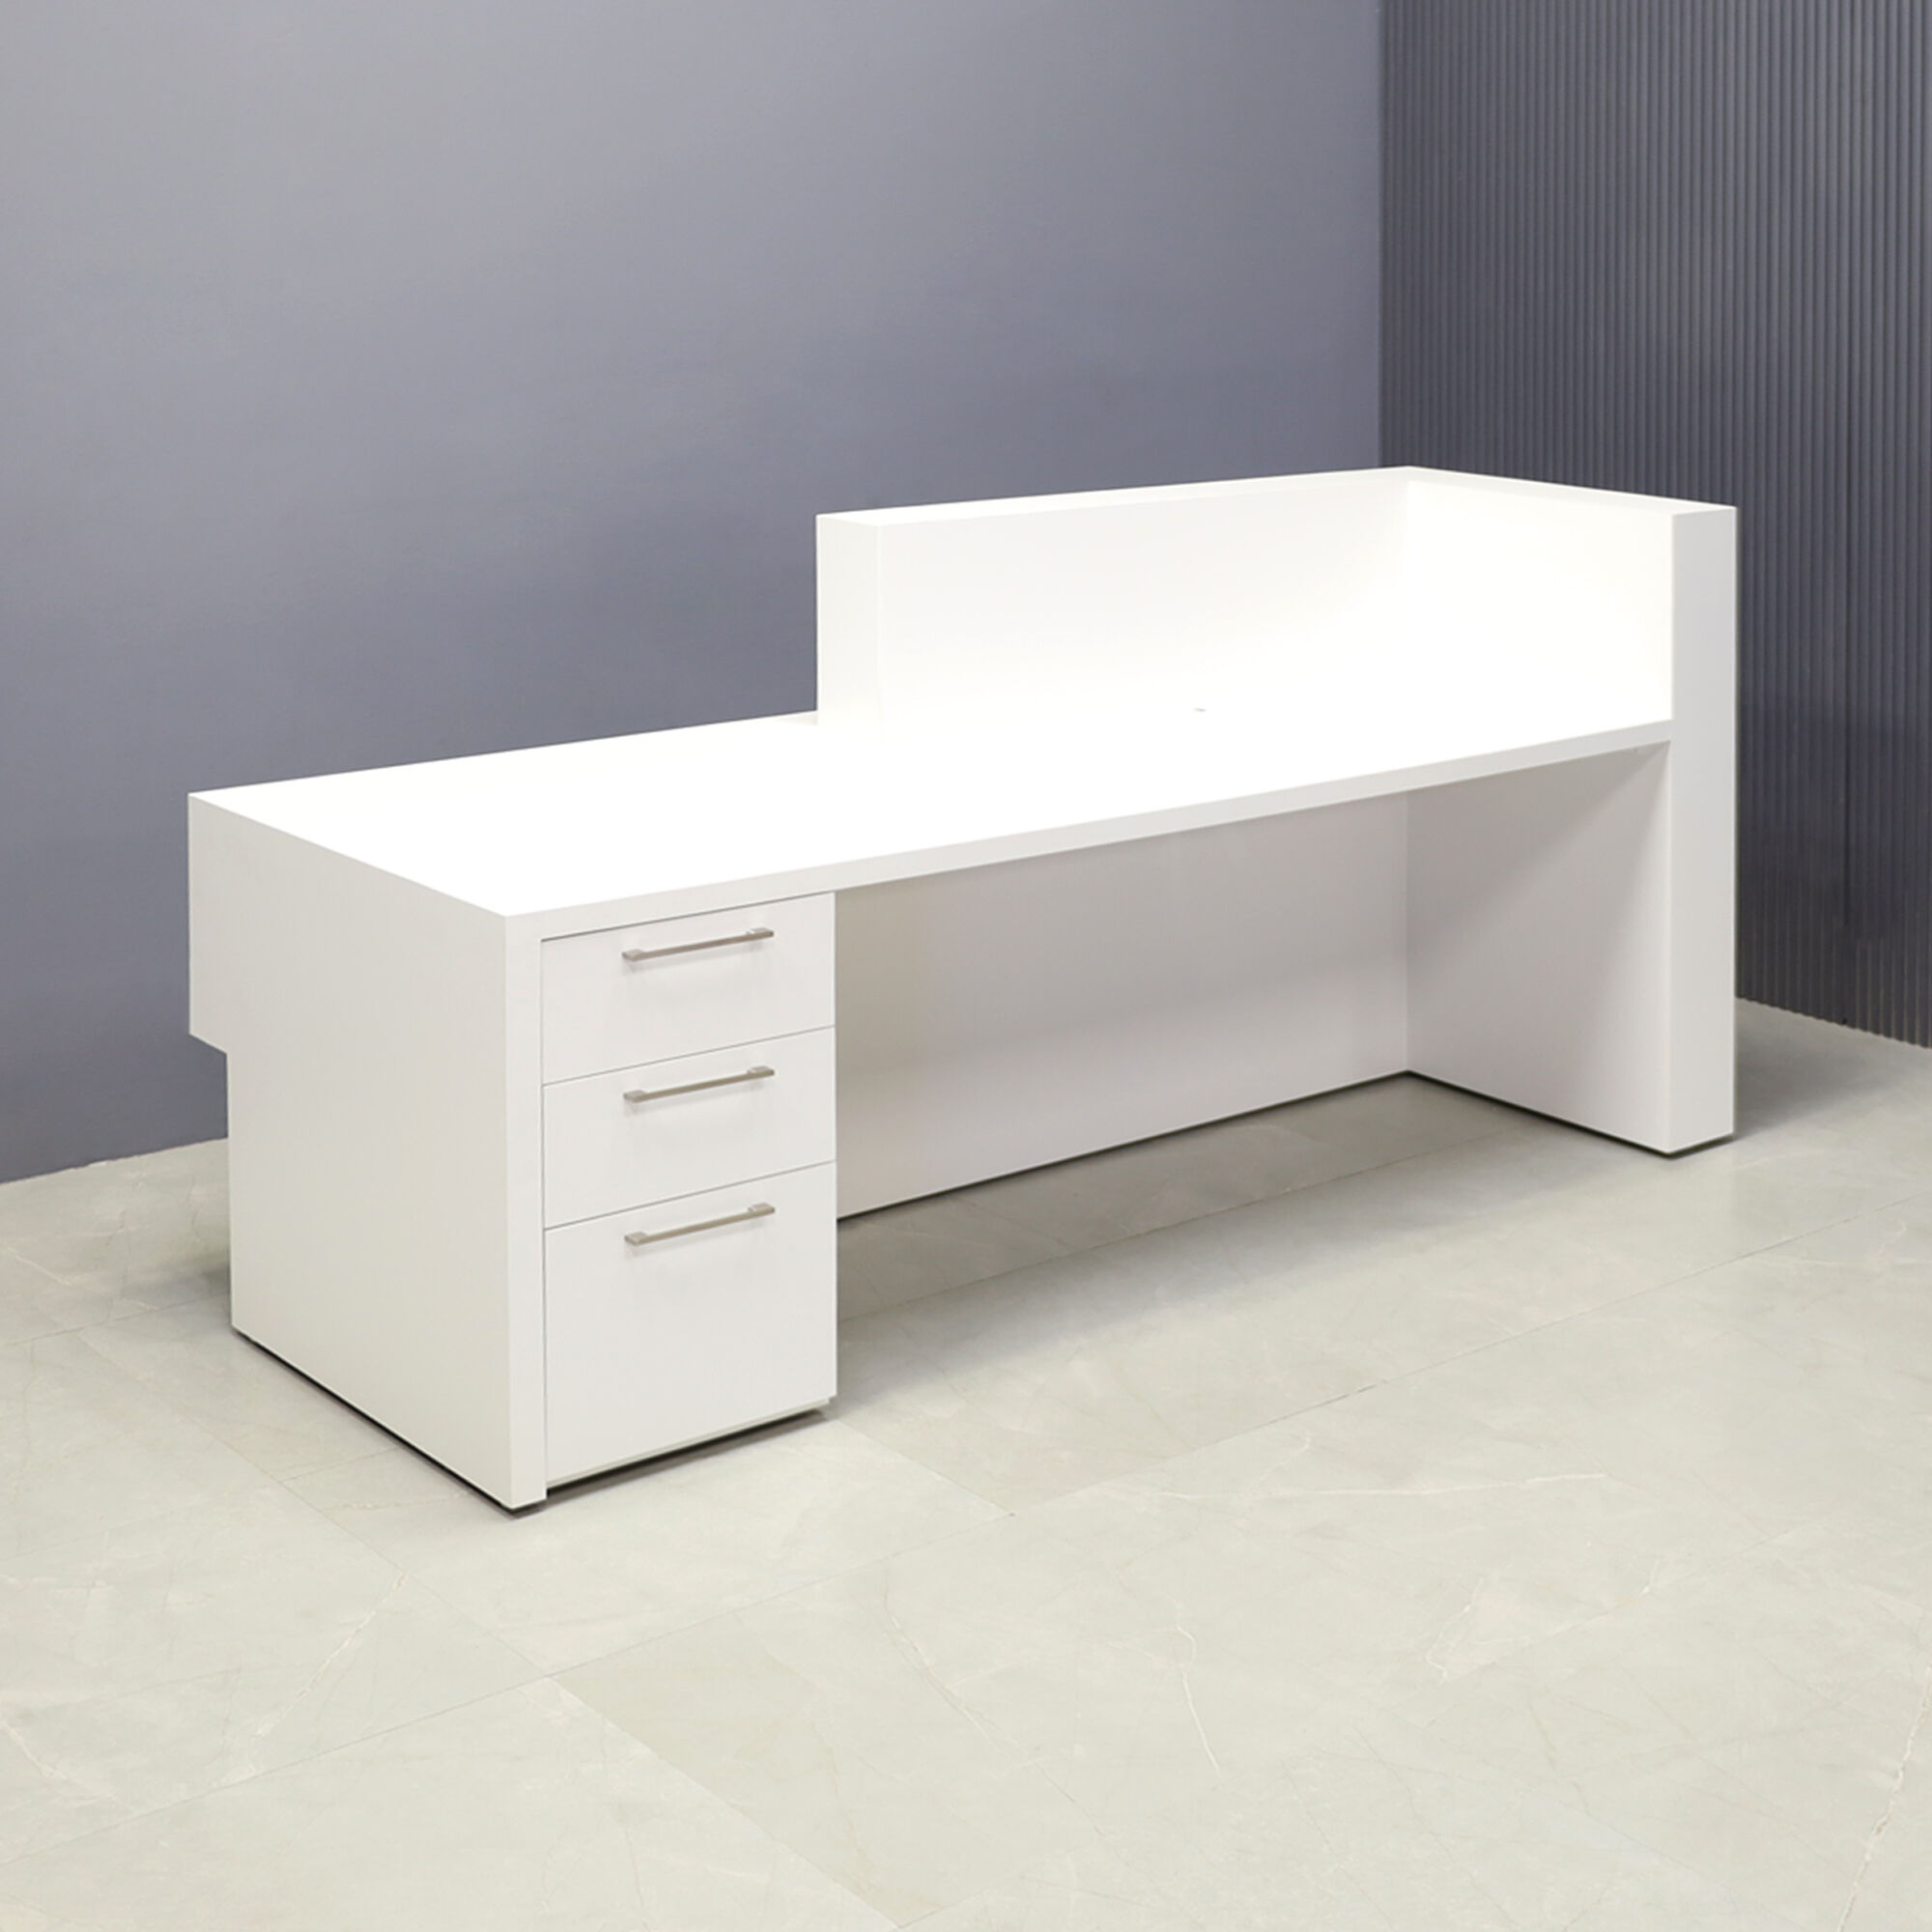 84-inch Atlanta Reception Desk in brazilwood countertop & base, dover off-white matte laminate workspace & front accent, with multi-colored LED. Built-in storage on left side when sitting, shown here.